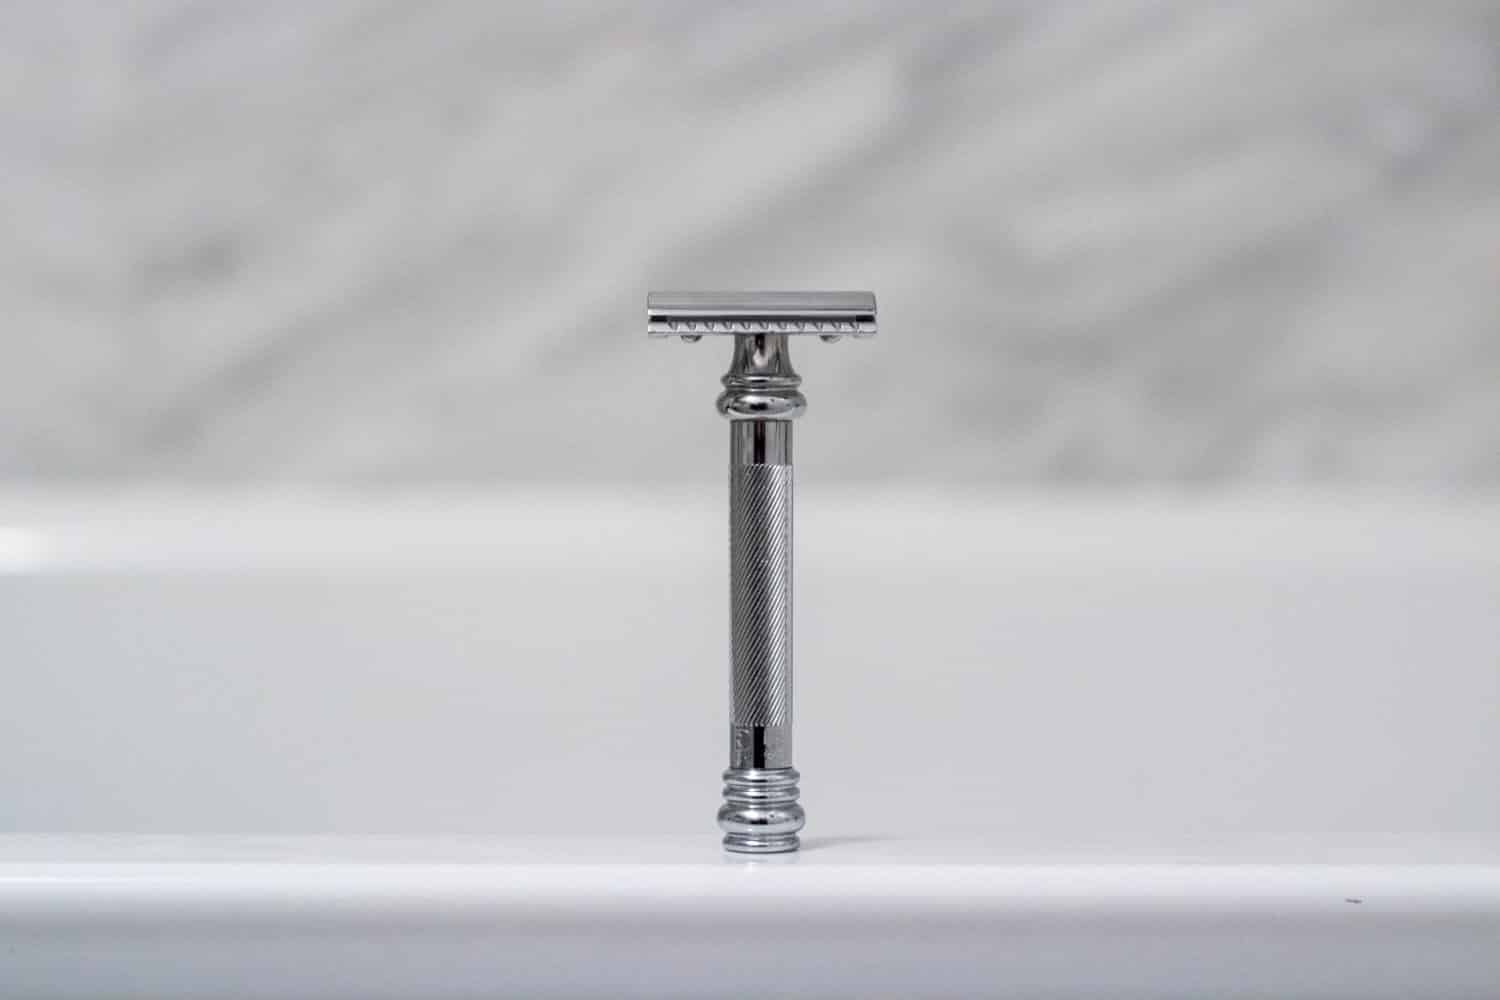 What is a safety razor